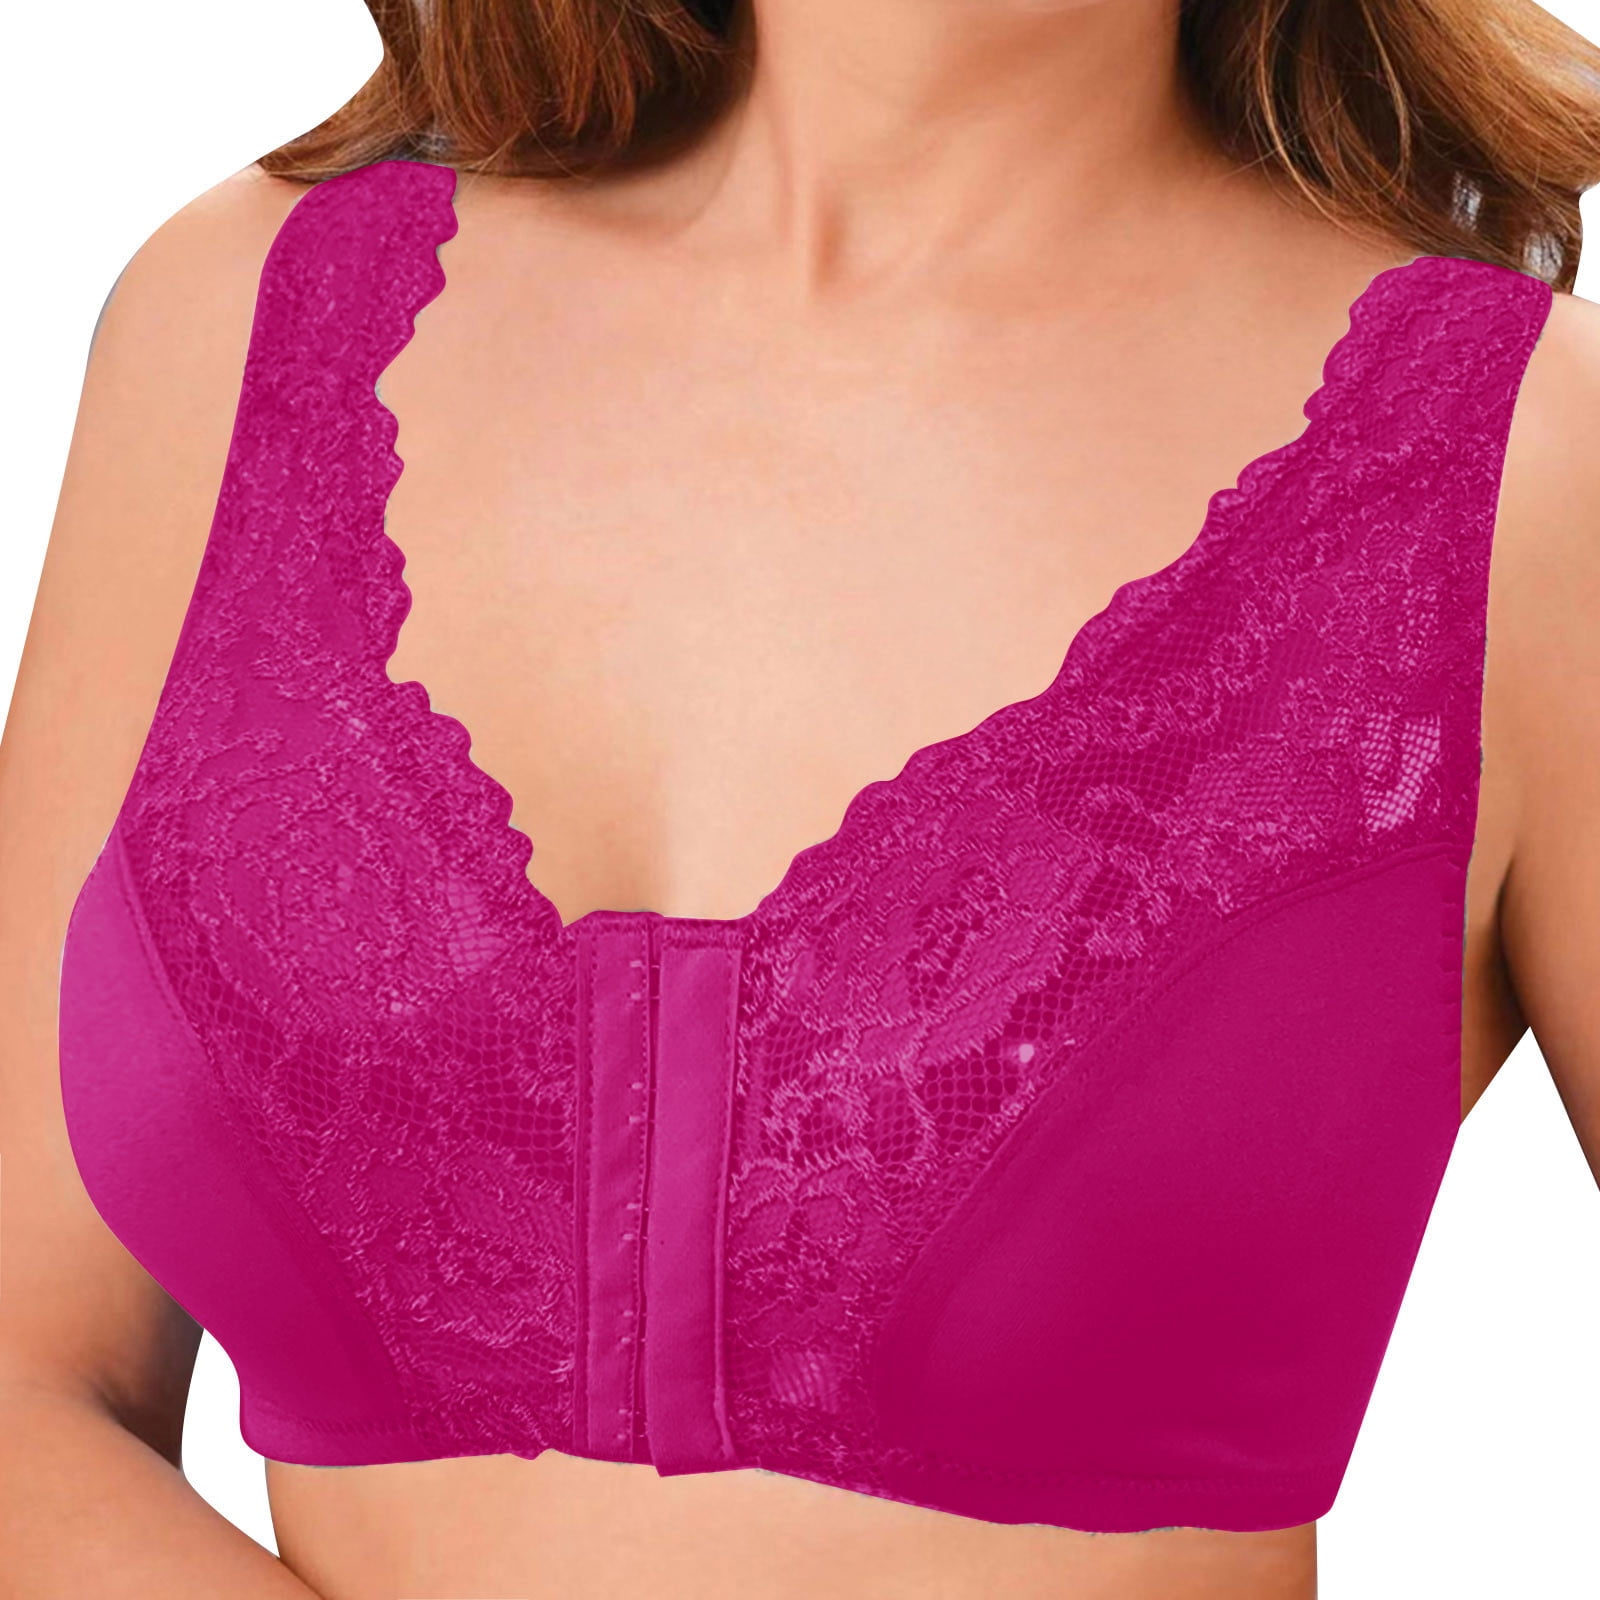 Backless Bra Full Coverage Push-Up Yoga Bra Lace Hot Pink Xl